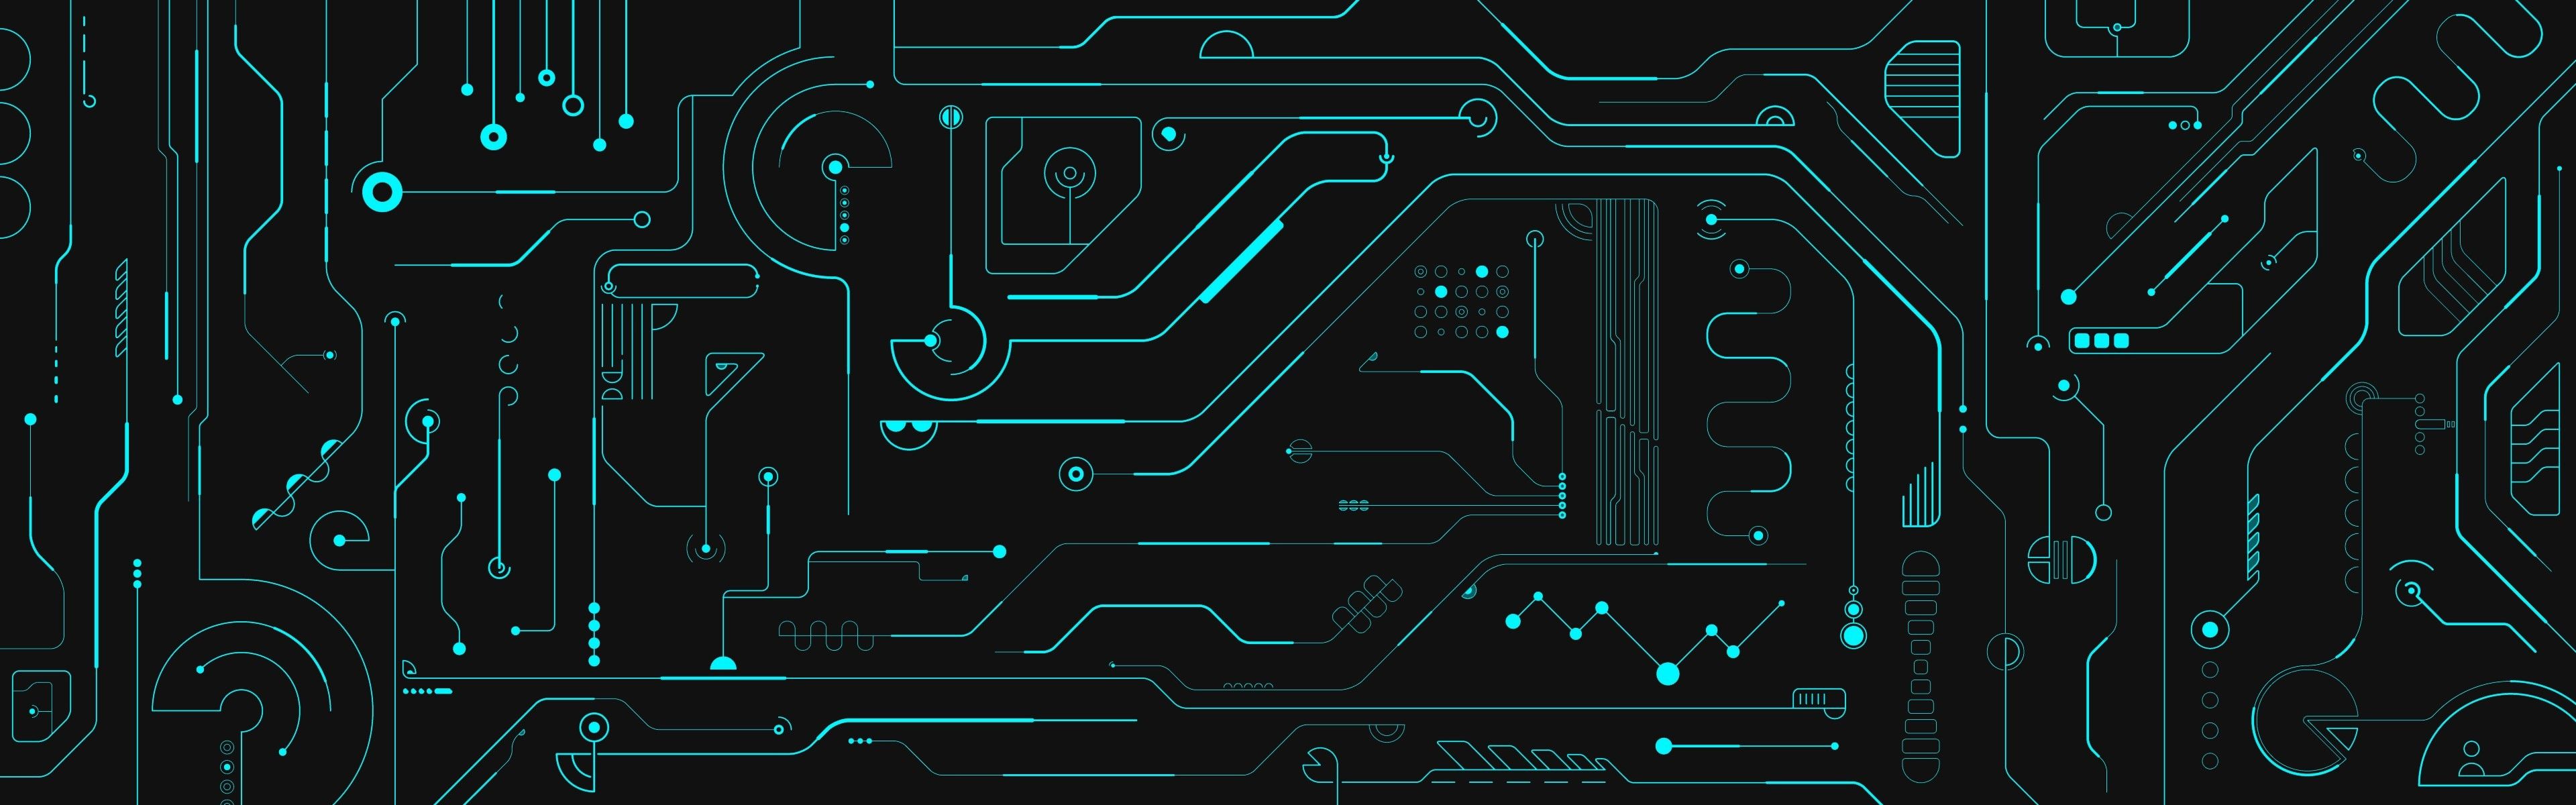 Wallpaper, black, digital art, space, minimalism, green, graphic design, pattern, technology, multiple display, circuits, line, graphics, 3840x1200 px, computer wallpaper, font, electrical network, visual effects 3840x1200